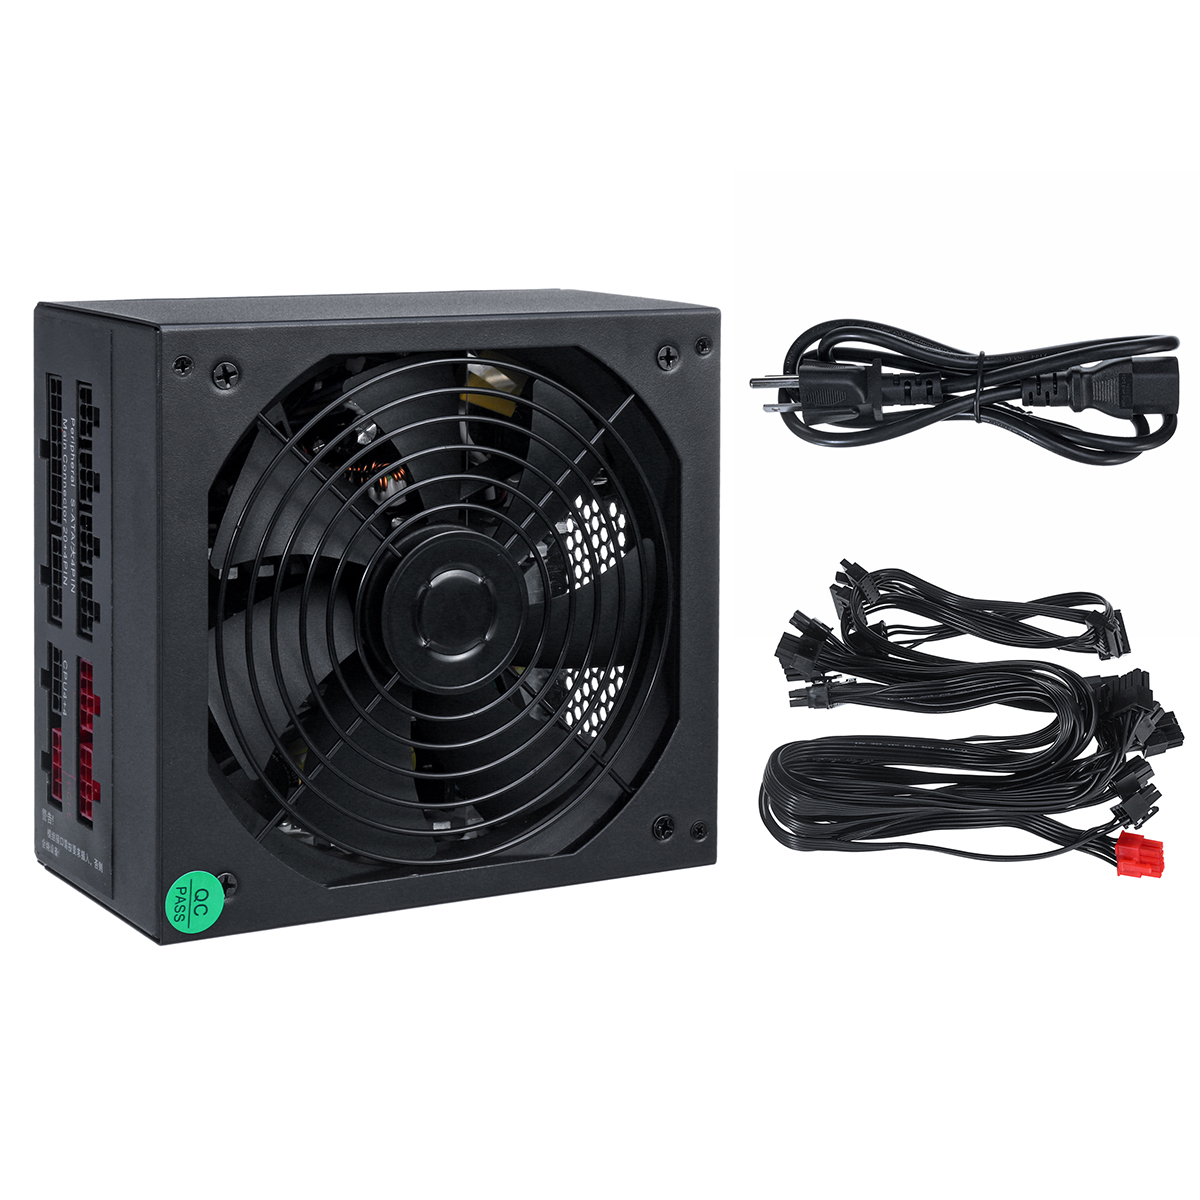 Find 750W Full Module Power Supply 110-230V 14cm Fan 24 Pin PCI SATA 12V EU/US/AU Plug Computer Power Supply for Sale on Gipsybee.com with cryptocurrencies